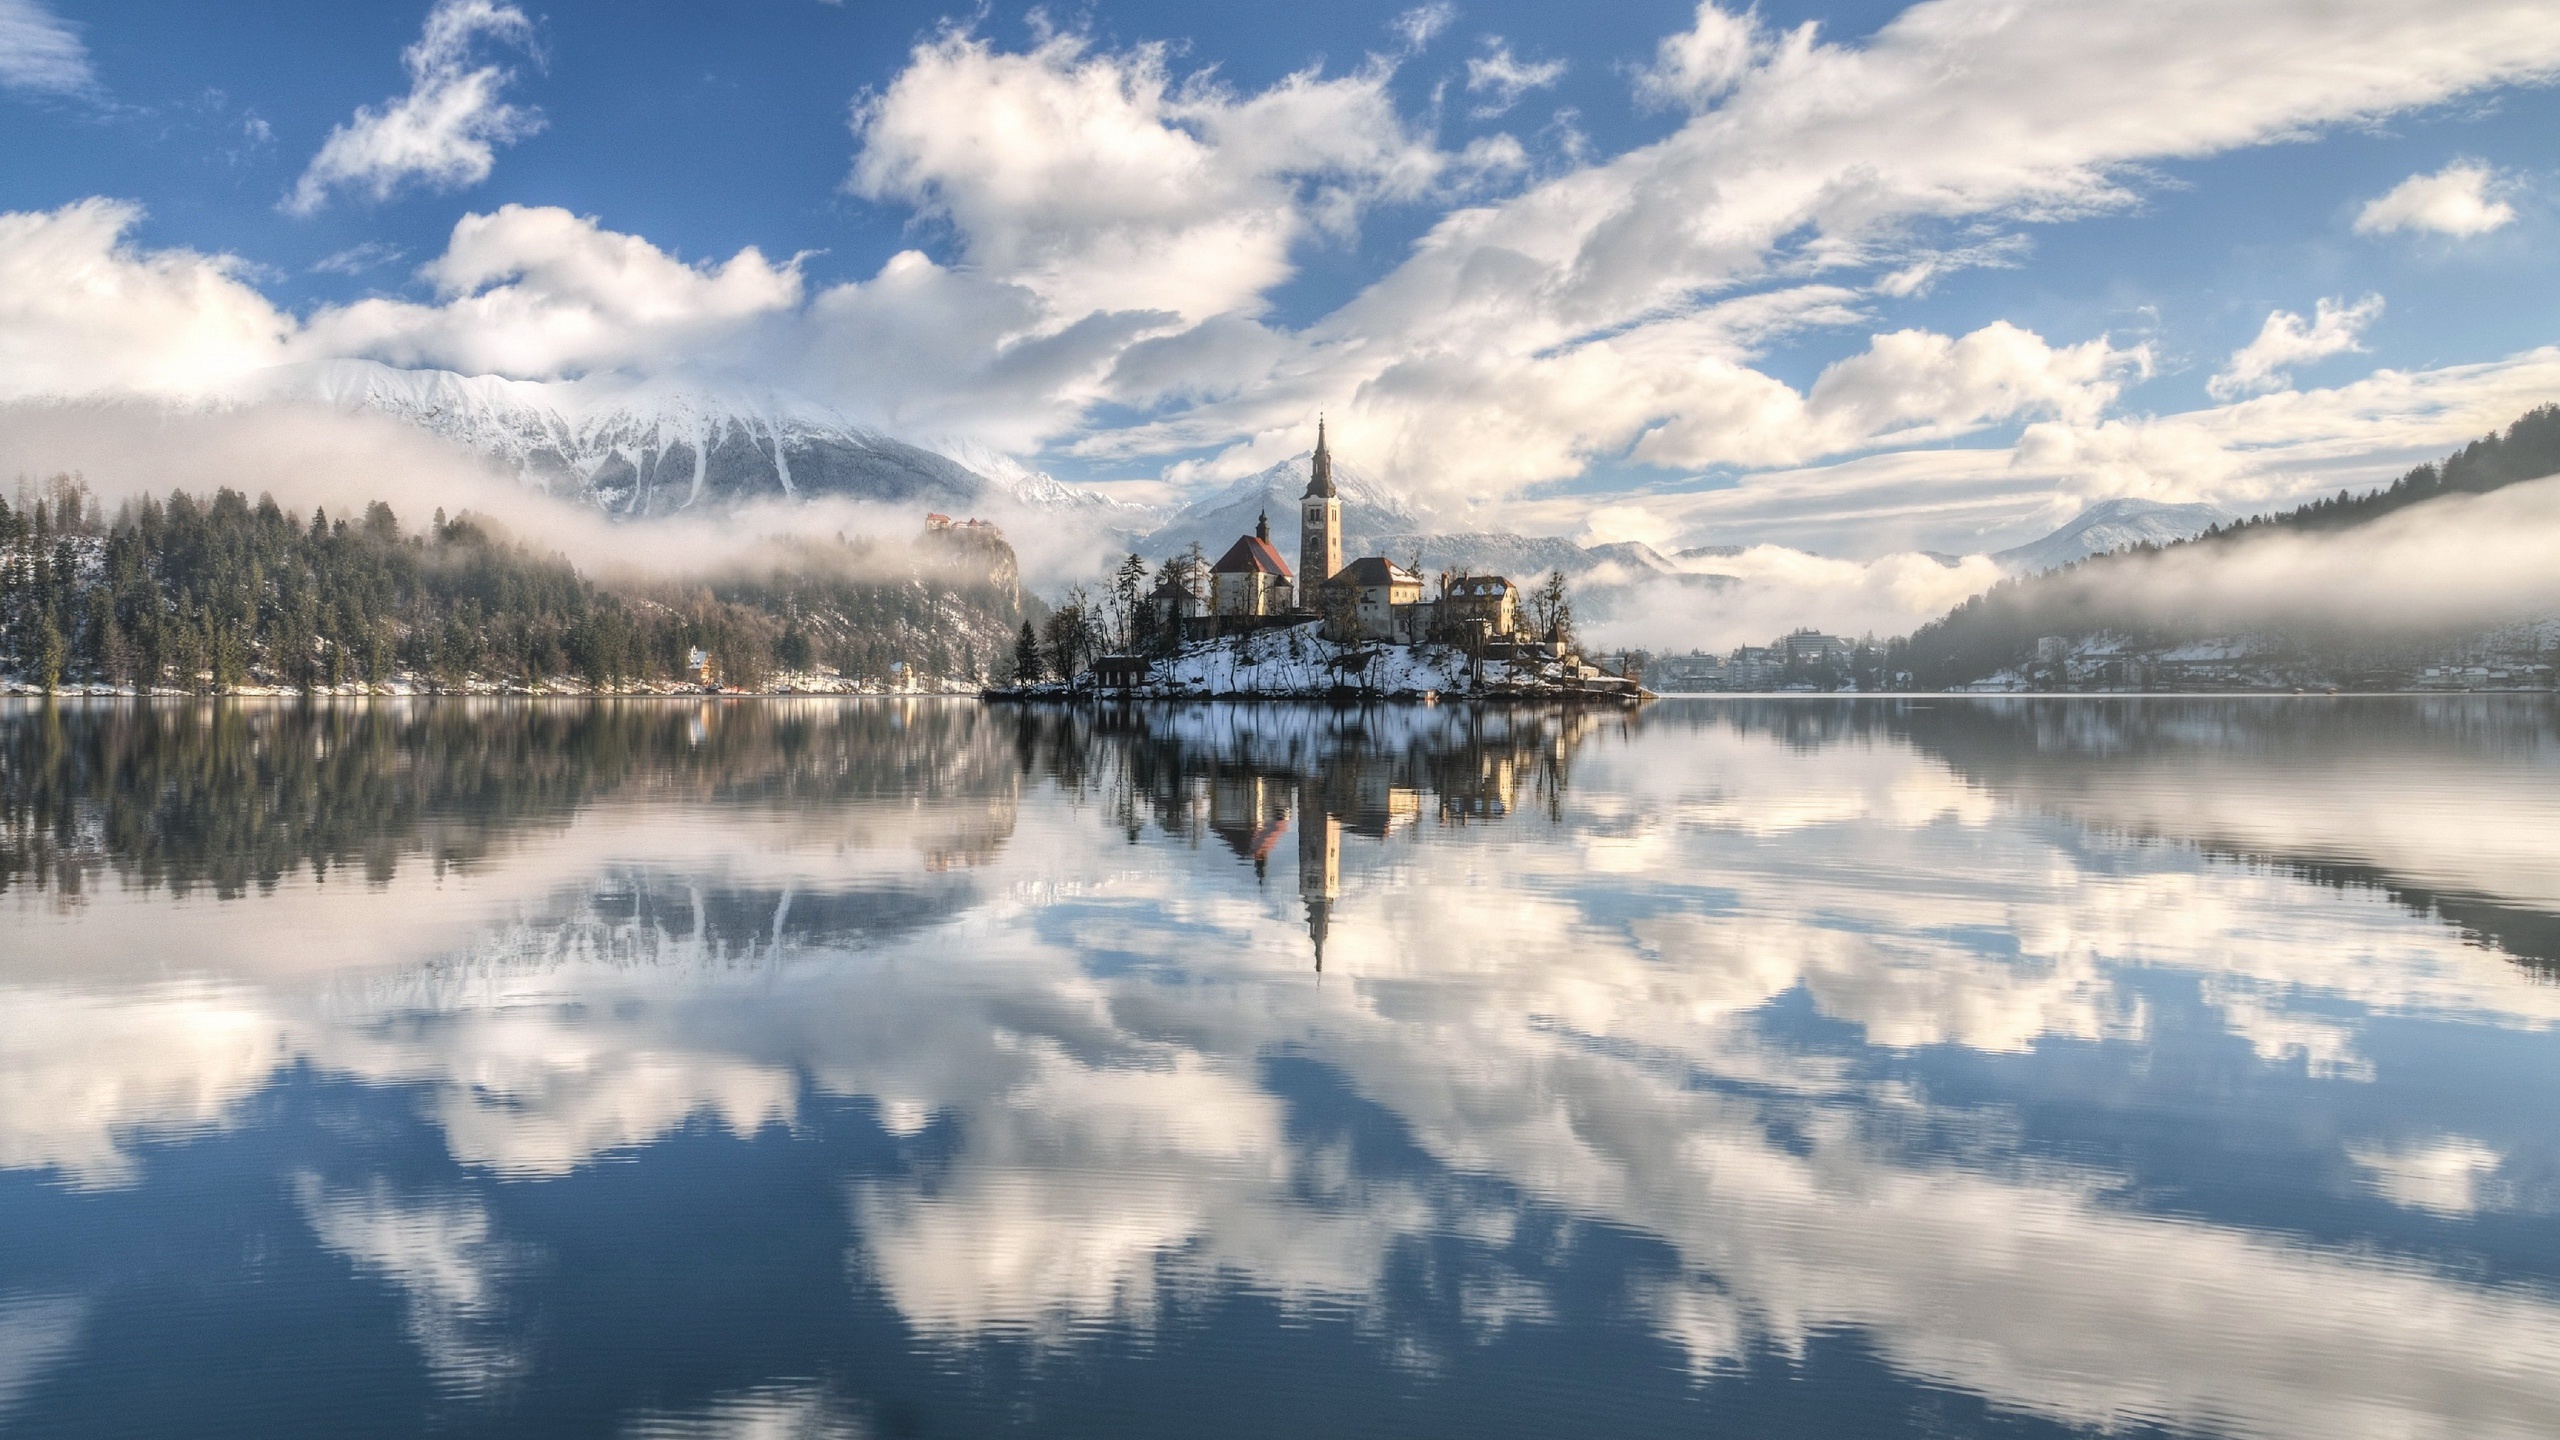 Lake Bled, Tranquil beauty, Majestic mountains, Reflections on water, 2560x1440 HD Desktop